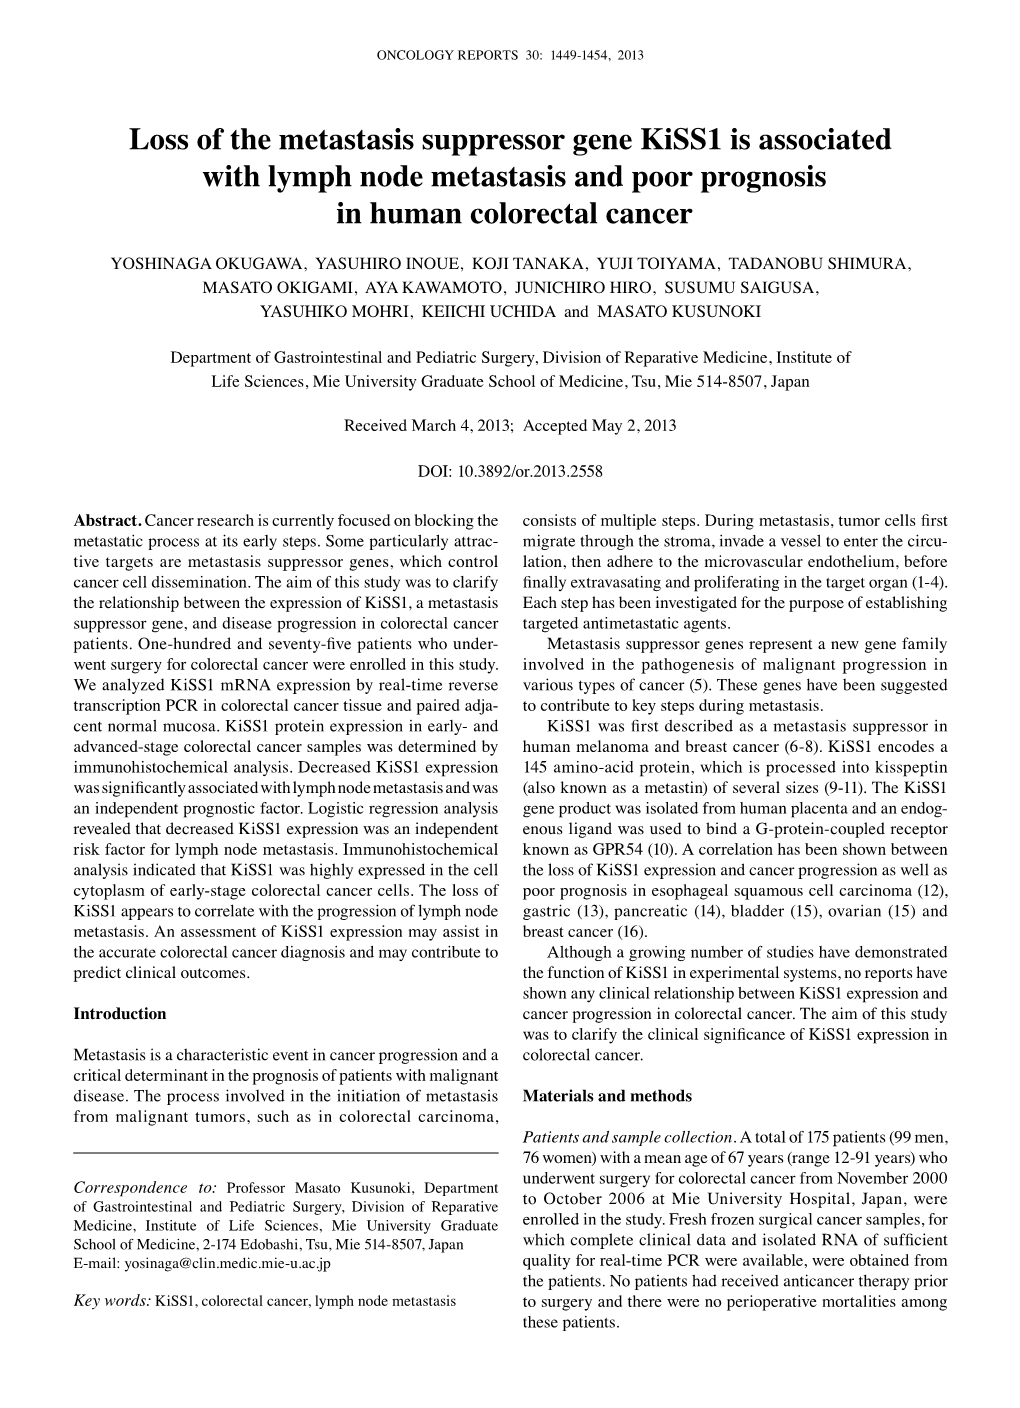 Loss of the Metastasis Suppressor Gene Kiss1 Is Associated with Lymph Node Metastasis and Poor Prognosis in Human Colorectal Cancer